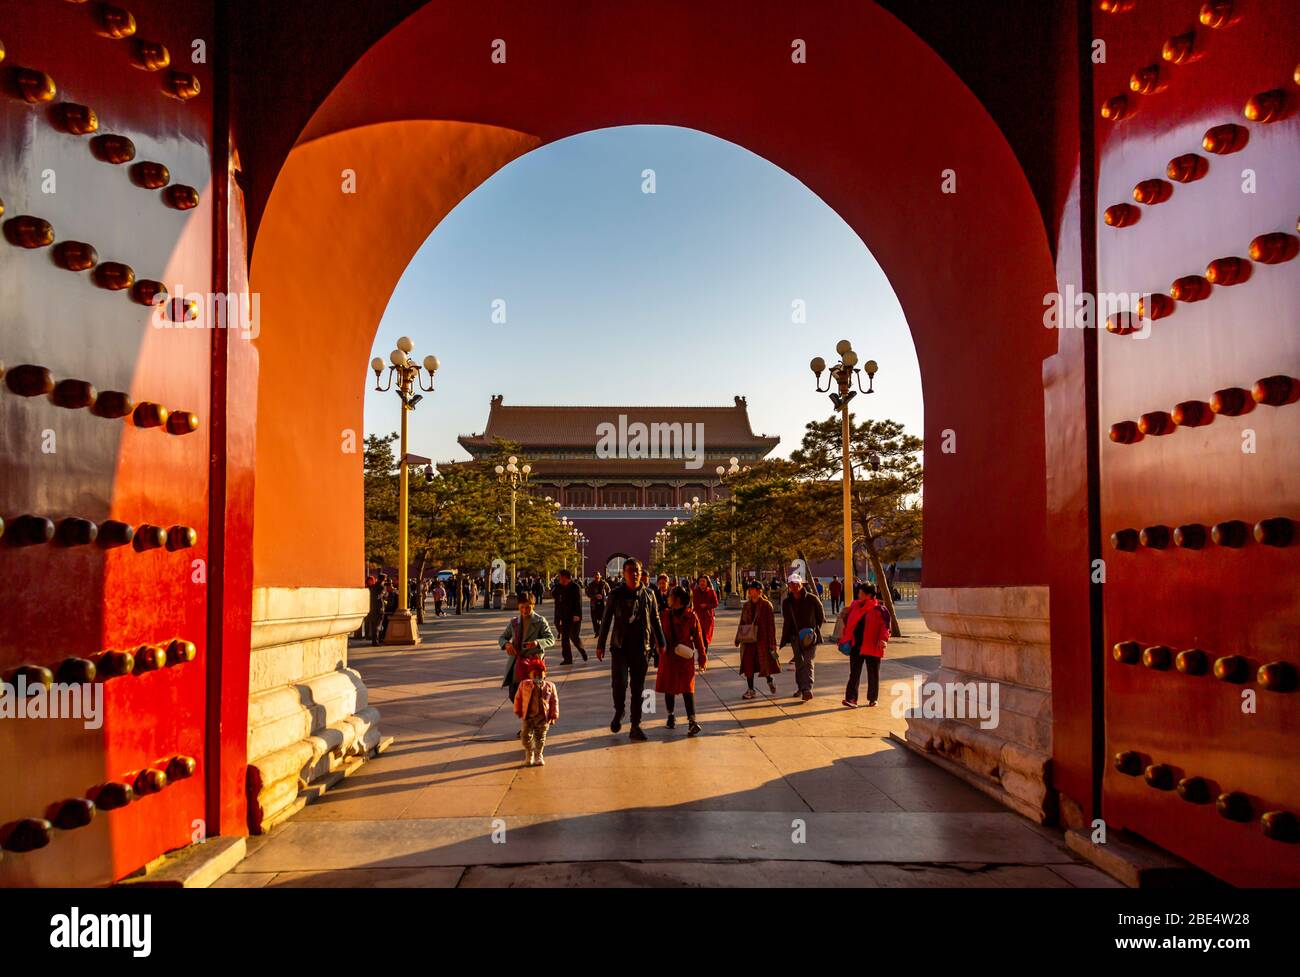 Gate of Heavenly Peace, Great Hall of the People, Tiananmen Square, Beijing, People's Republic of China, Asia Stock Photo